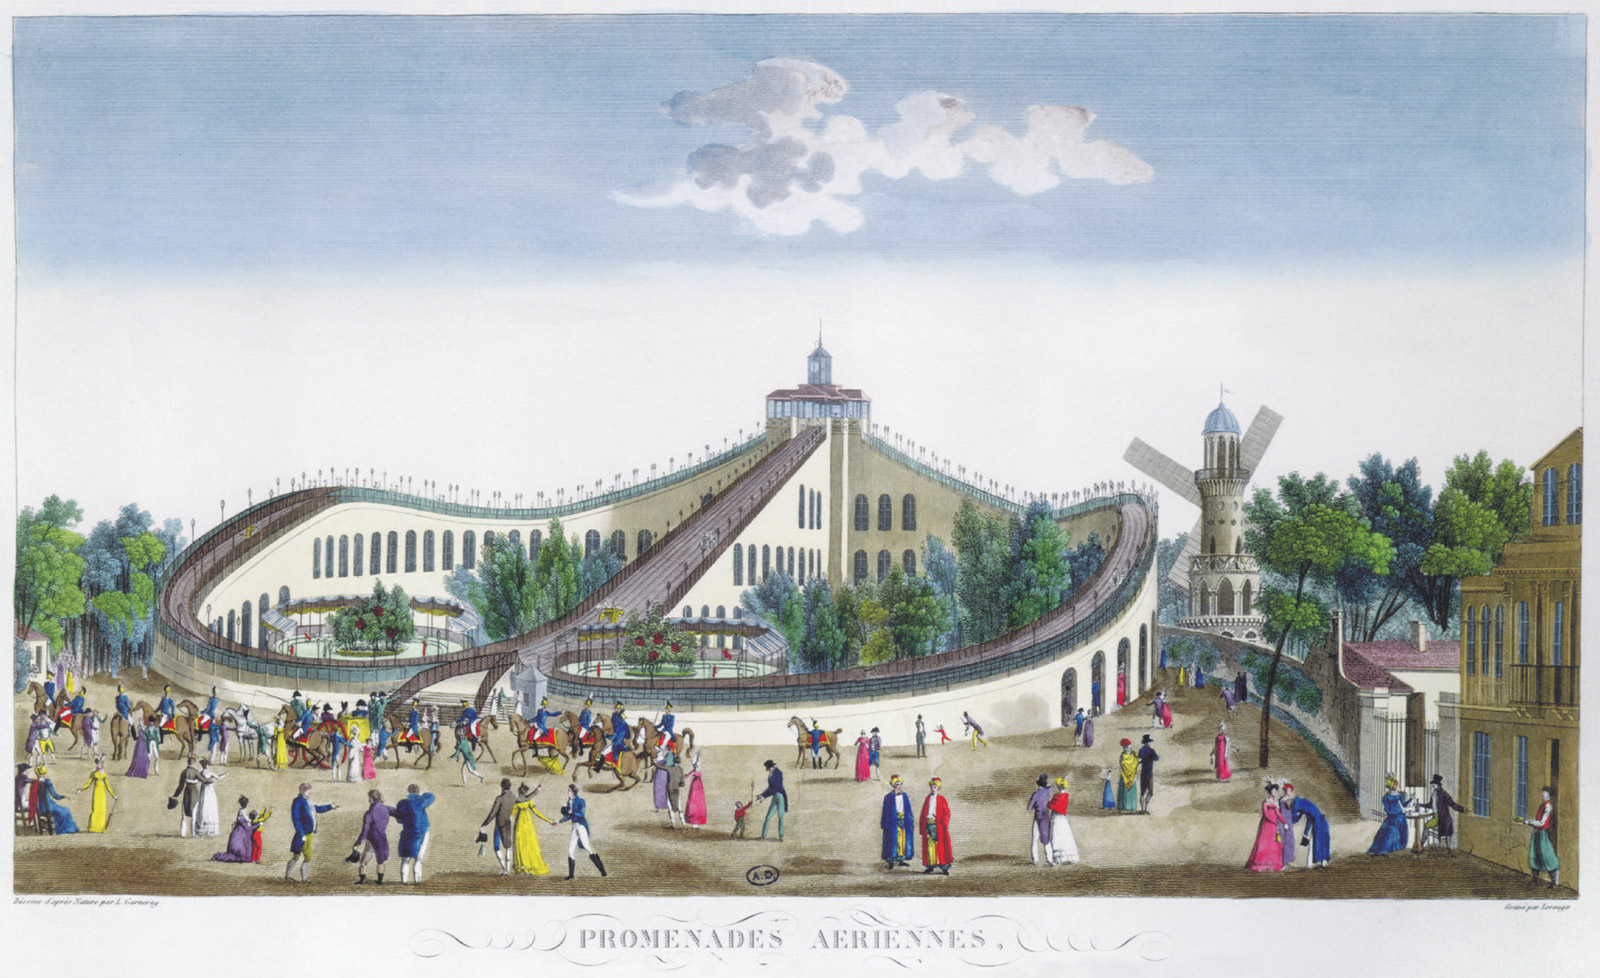 The front of this issue’s postcard featuring an eighteen seventeen engraving by Louis Garneray of the Promenade Aériennes in Beaujon Gardens.